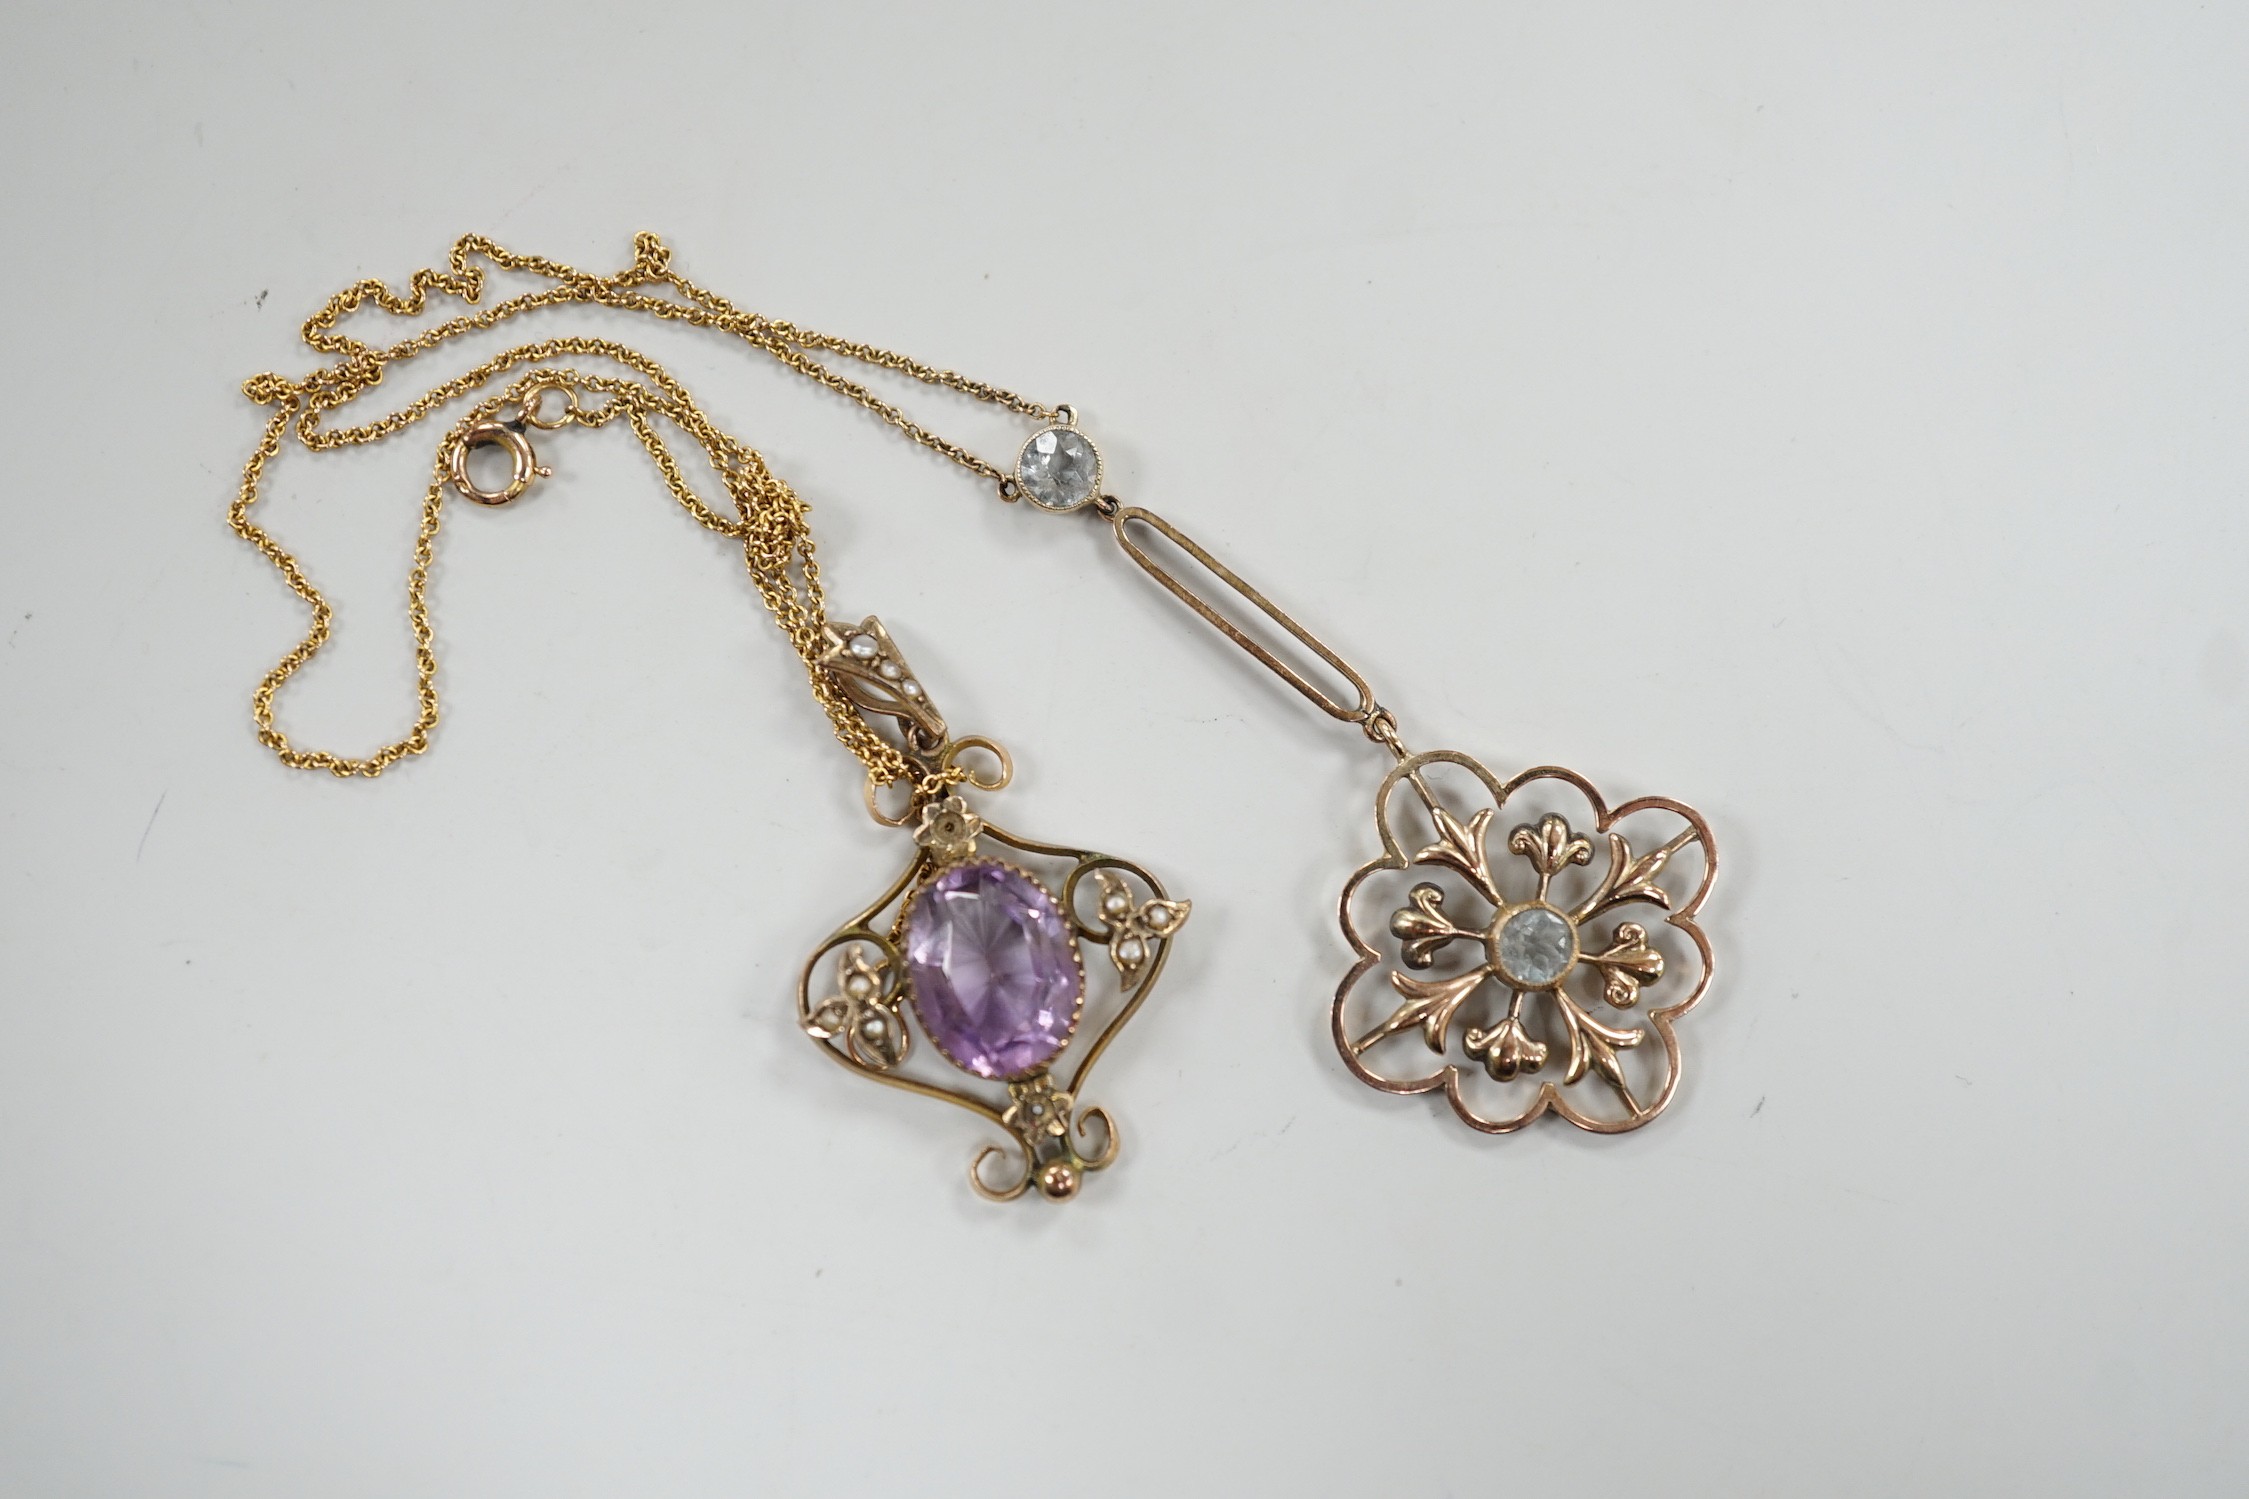 Two Edwardian 9ct and gem set pendants, including amethyst and seed pearl and two stone aquamarine drop, 53mm on a yellow metal chain, gross weight 6.3 grams.